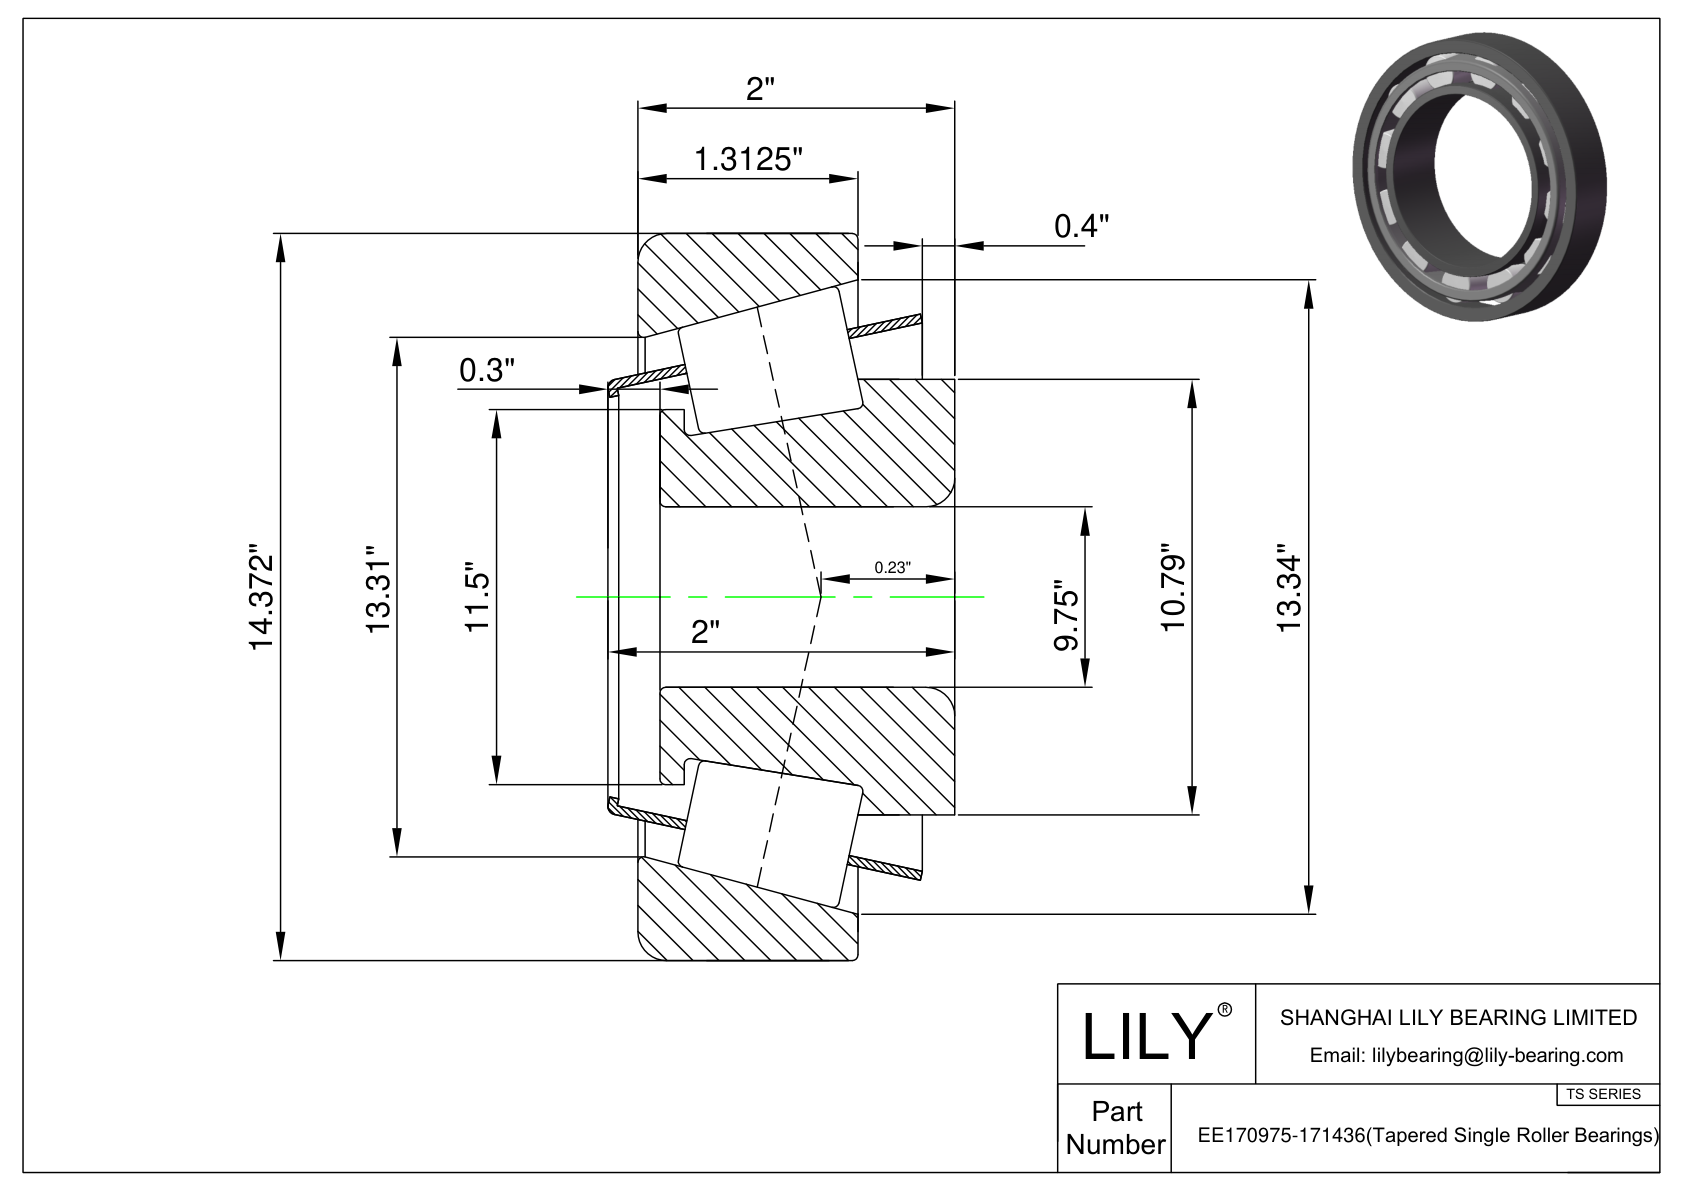 EE170975-171436 TS (Tapered Single Roller Bearings) (Imperial) cad drawing